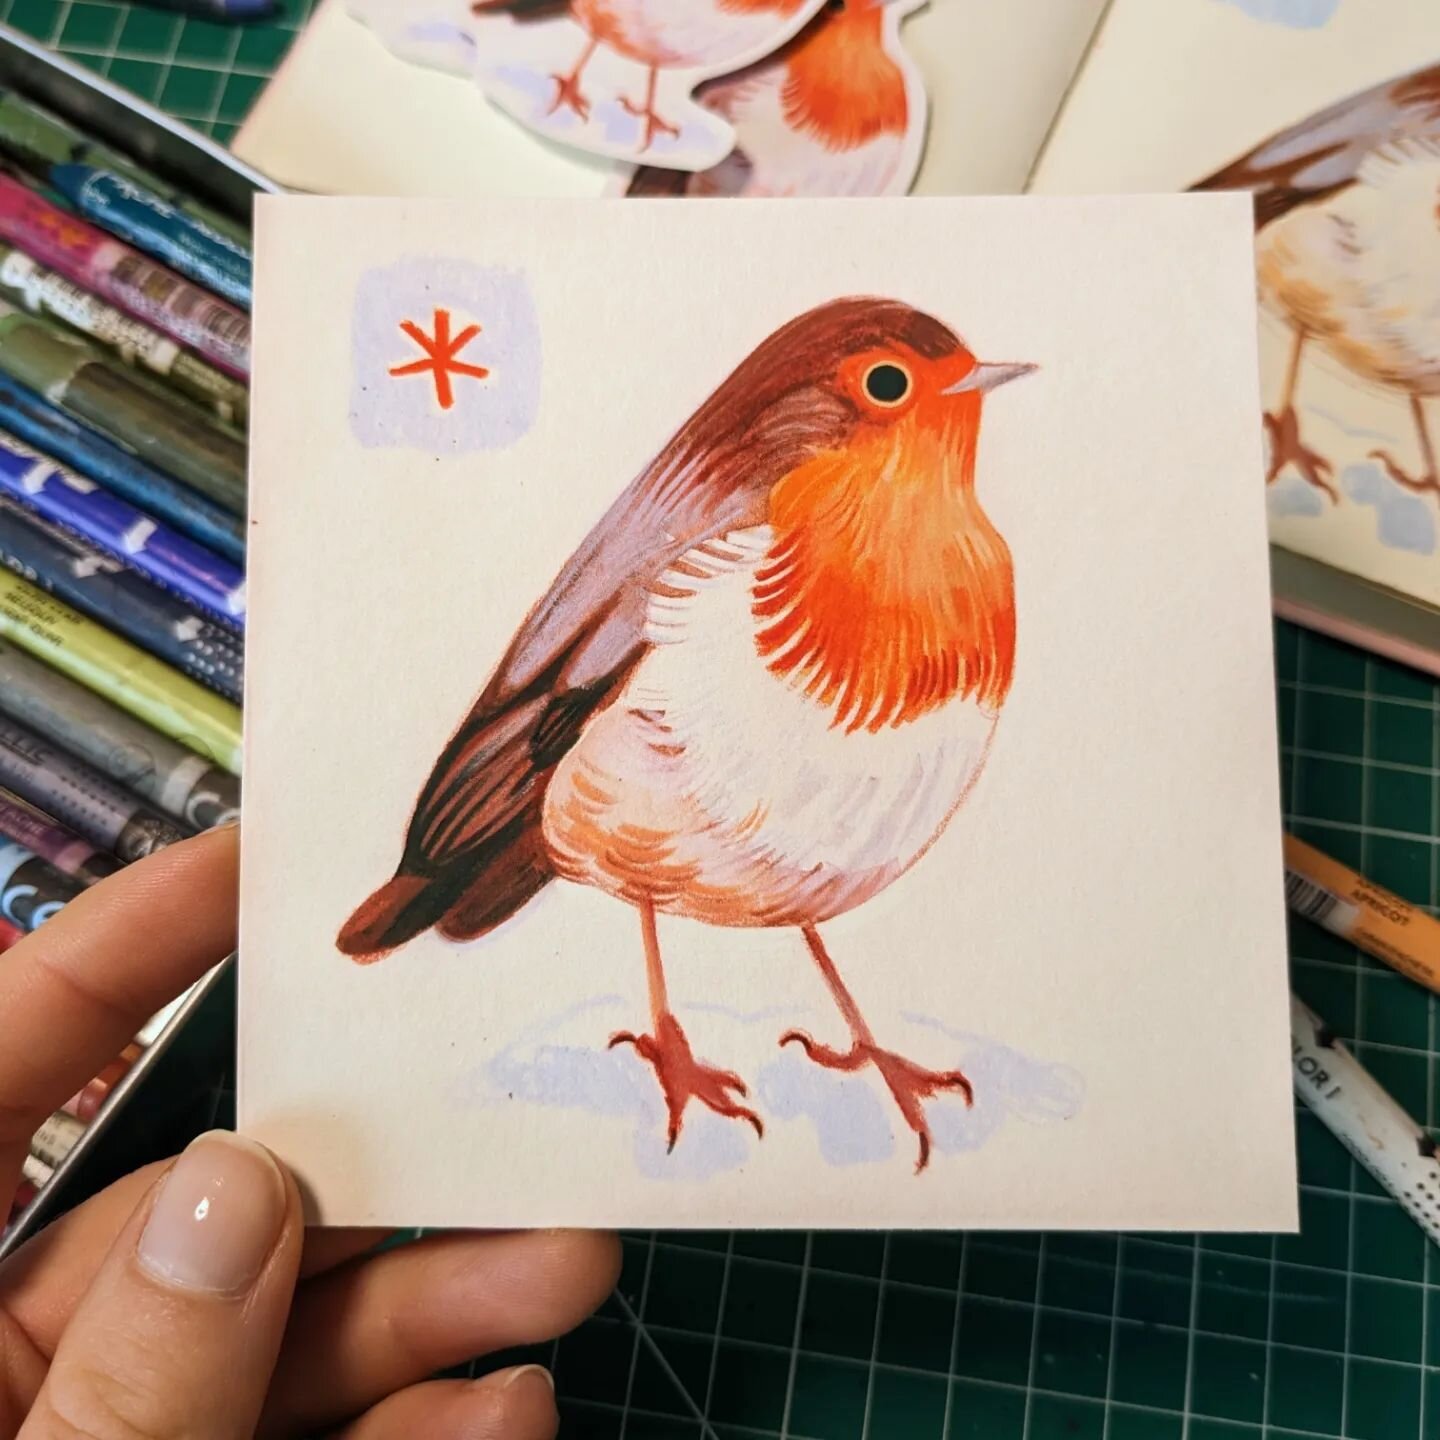 Red Robin has just been added onto my store ! Either as a print or a sticker 🐤

Link is in my bio - www.elisehibberd.com/shop

#illustration #art #drawing #instaart #artistoninstagram #artprint #robin #christmas #christmasshopping #merrychristmas